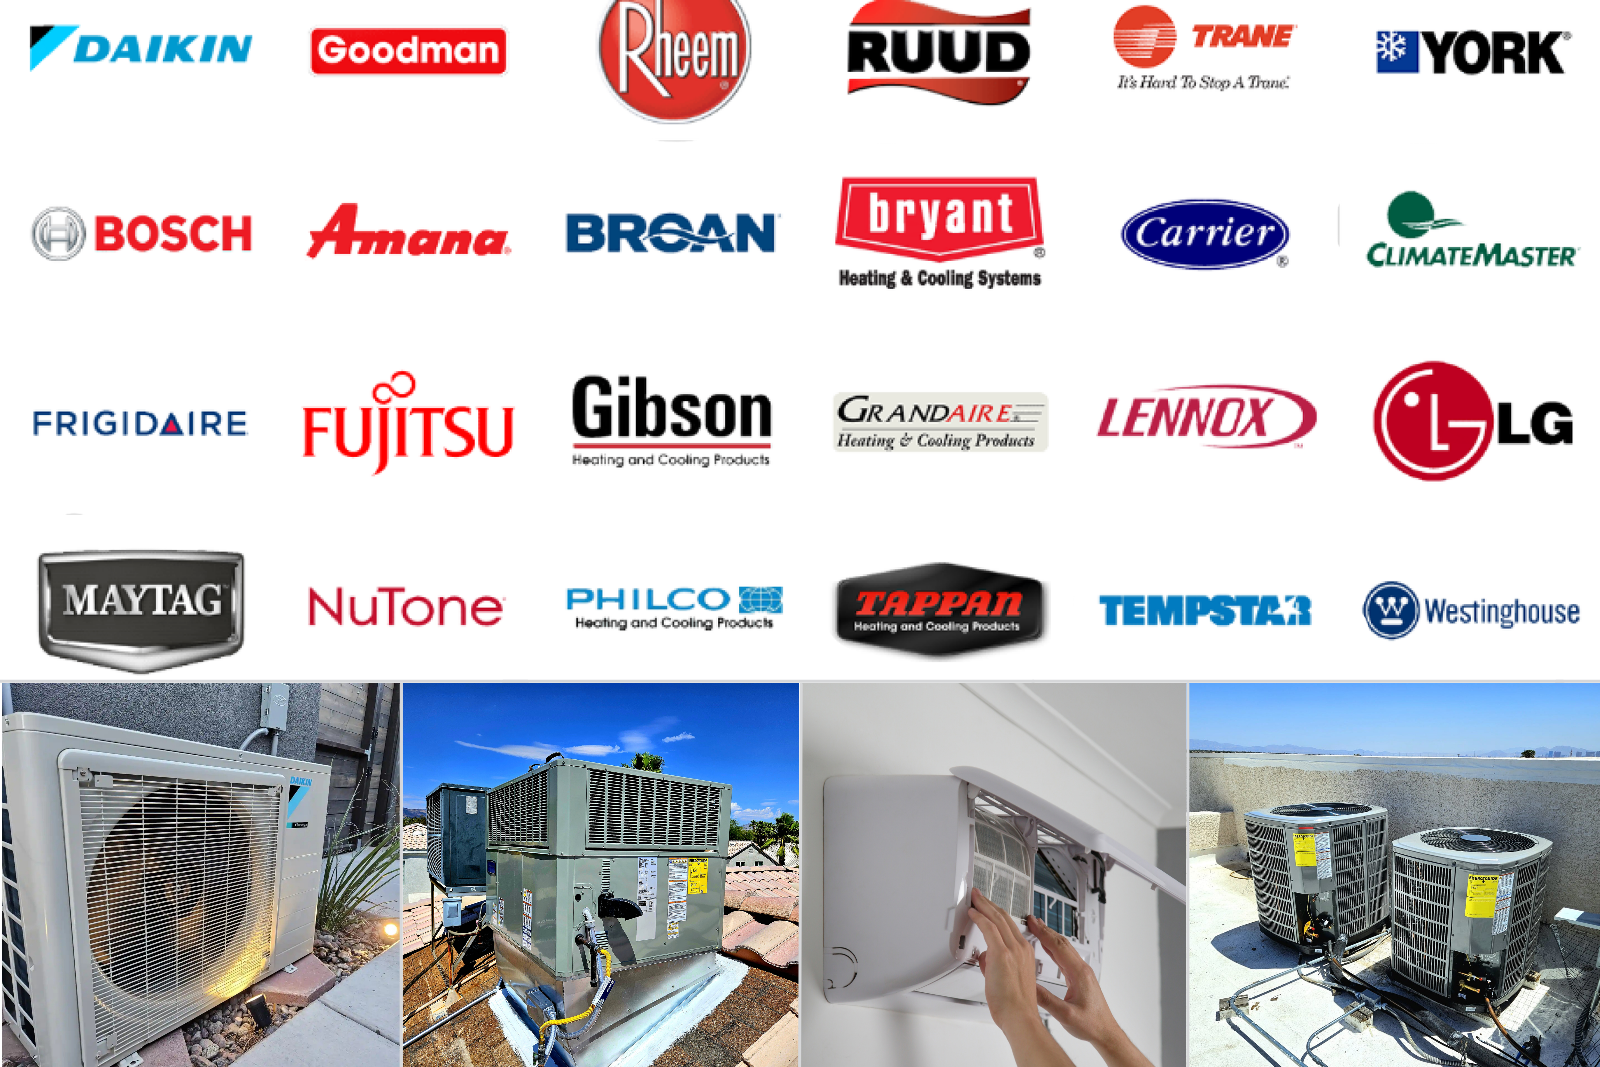 We installed a bunch of different air conditioning brands